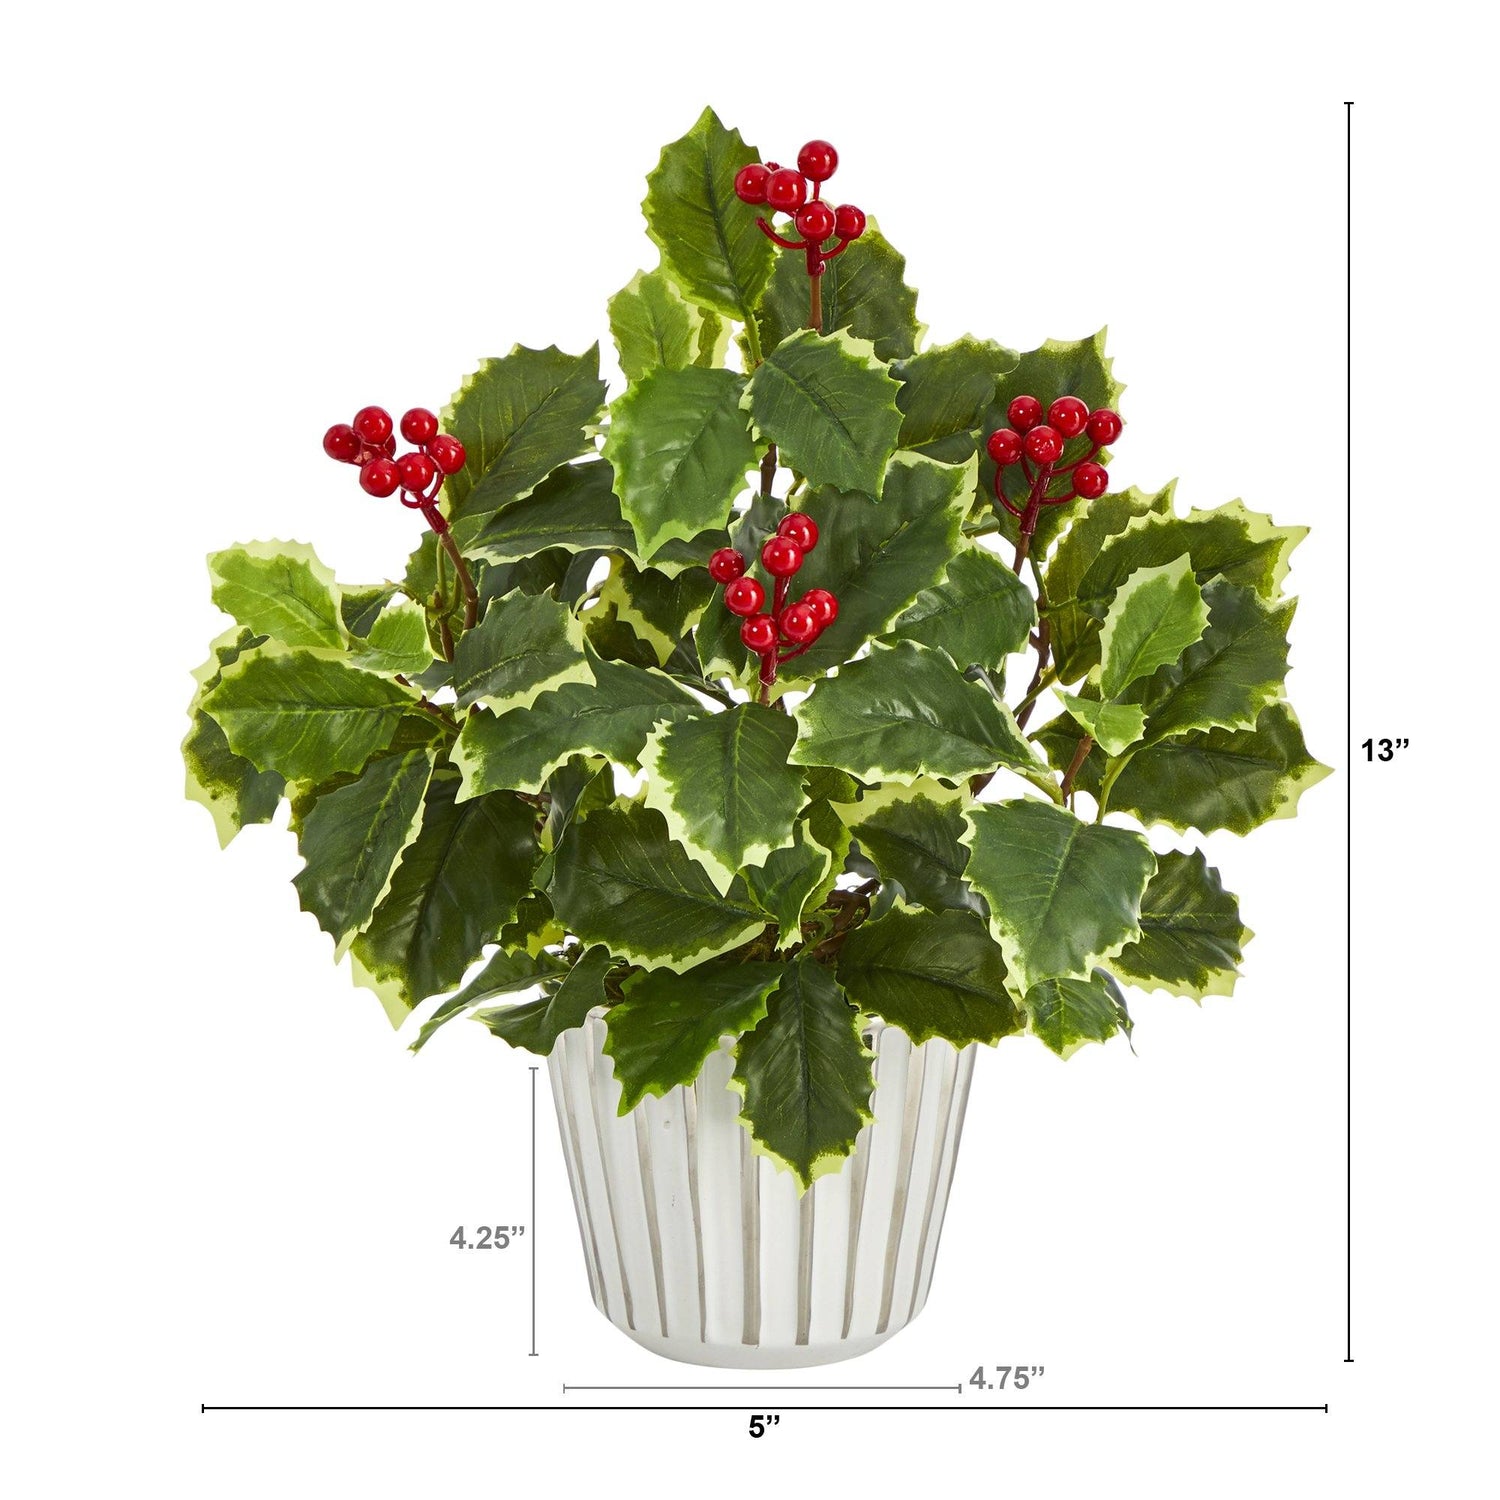 13” Variegated Holly Leaf Artificial Plant in White Planter with Silver Trimming (Real Touch)